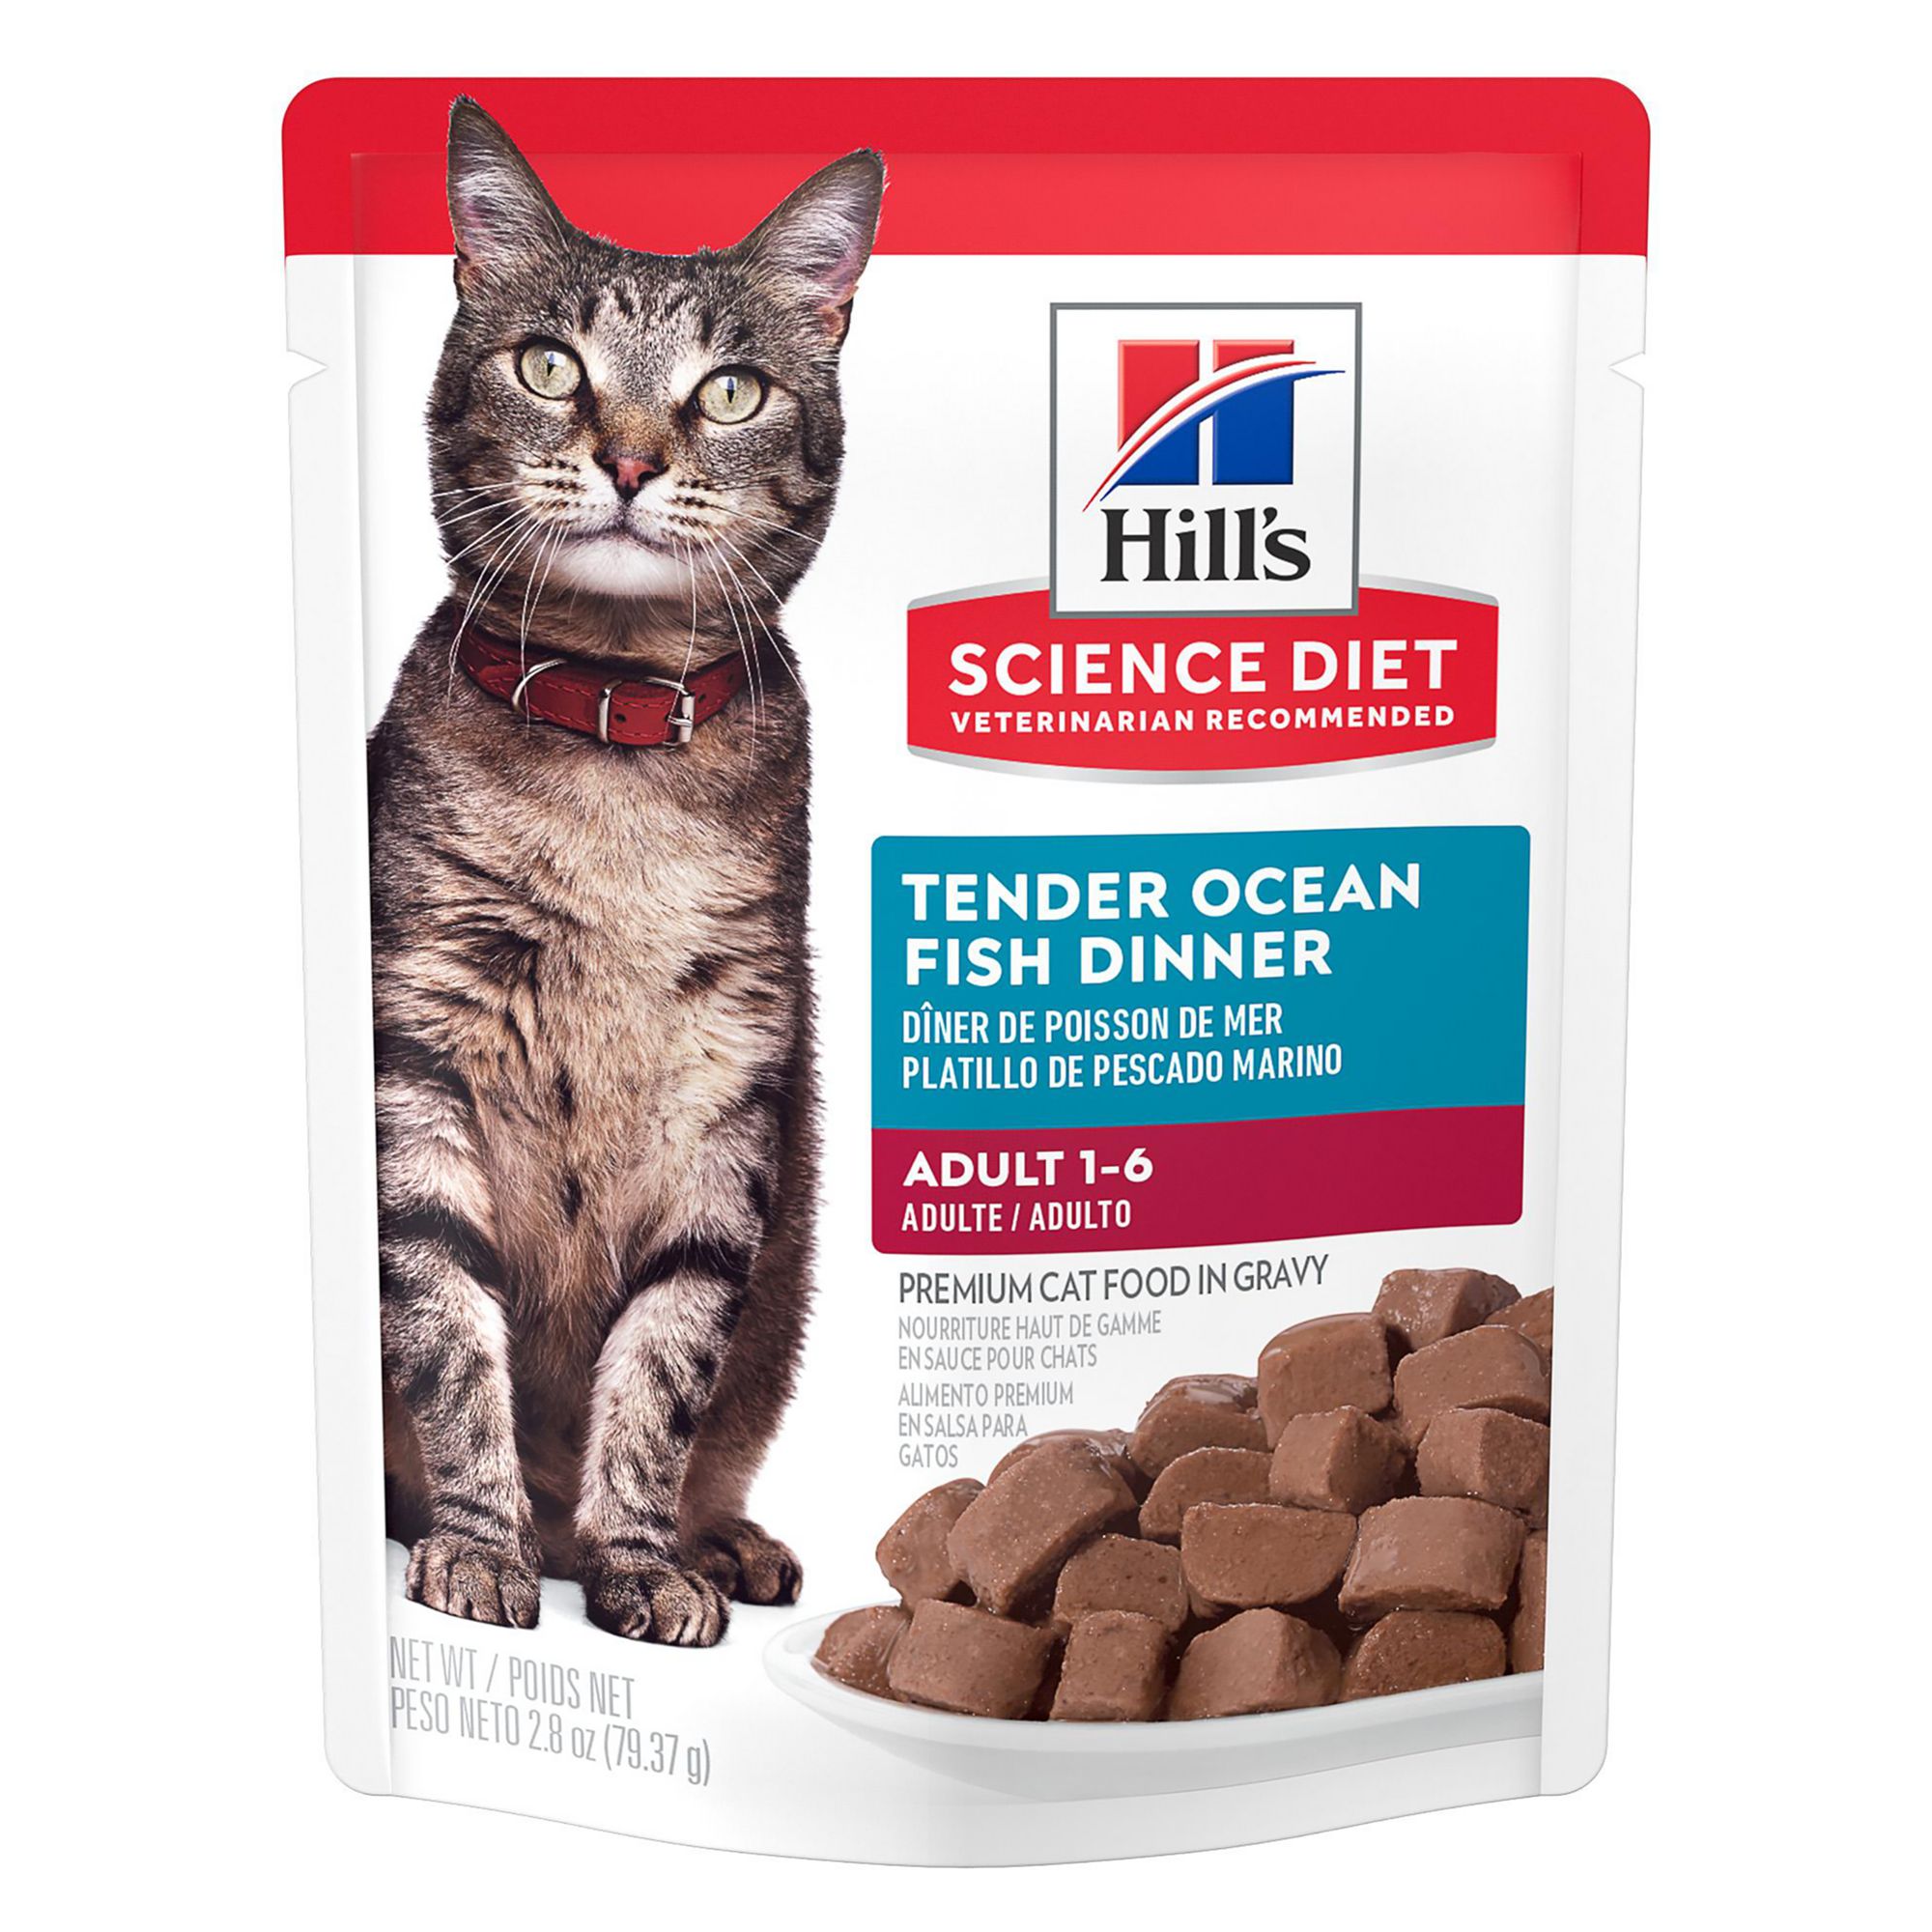 veterinarian recommended wet cat food